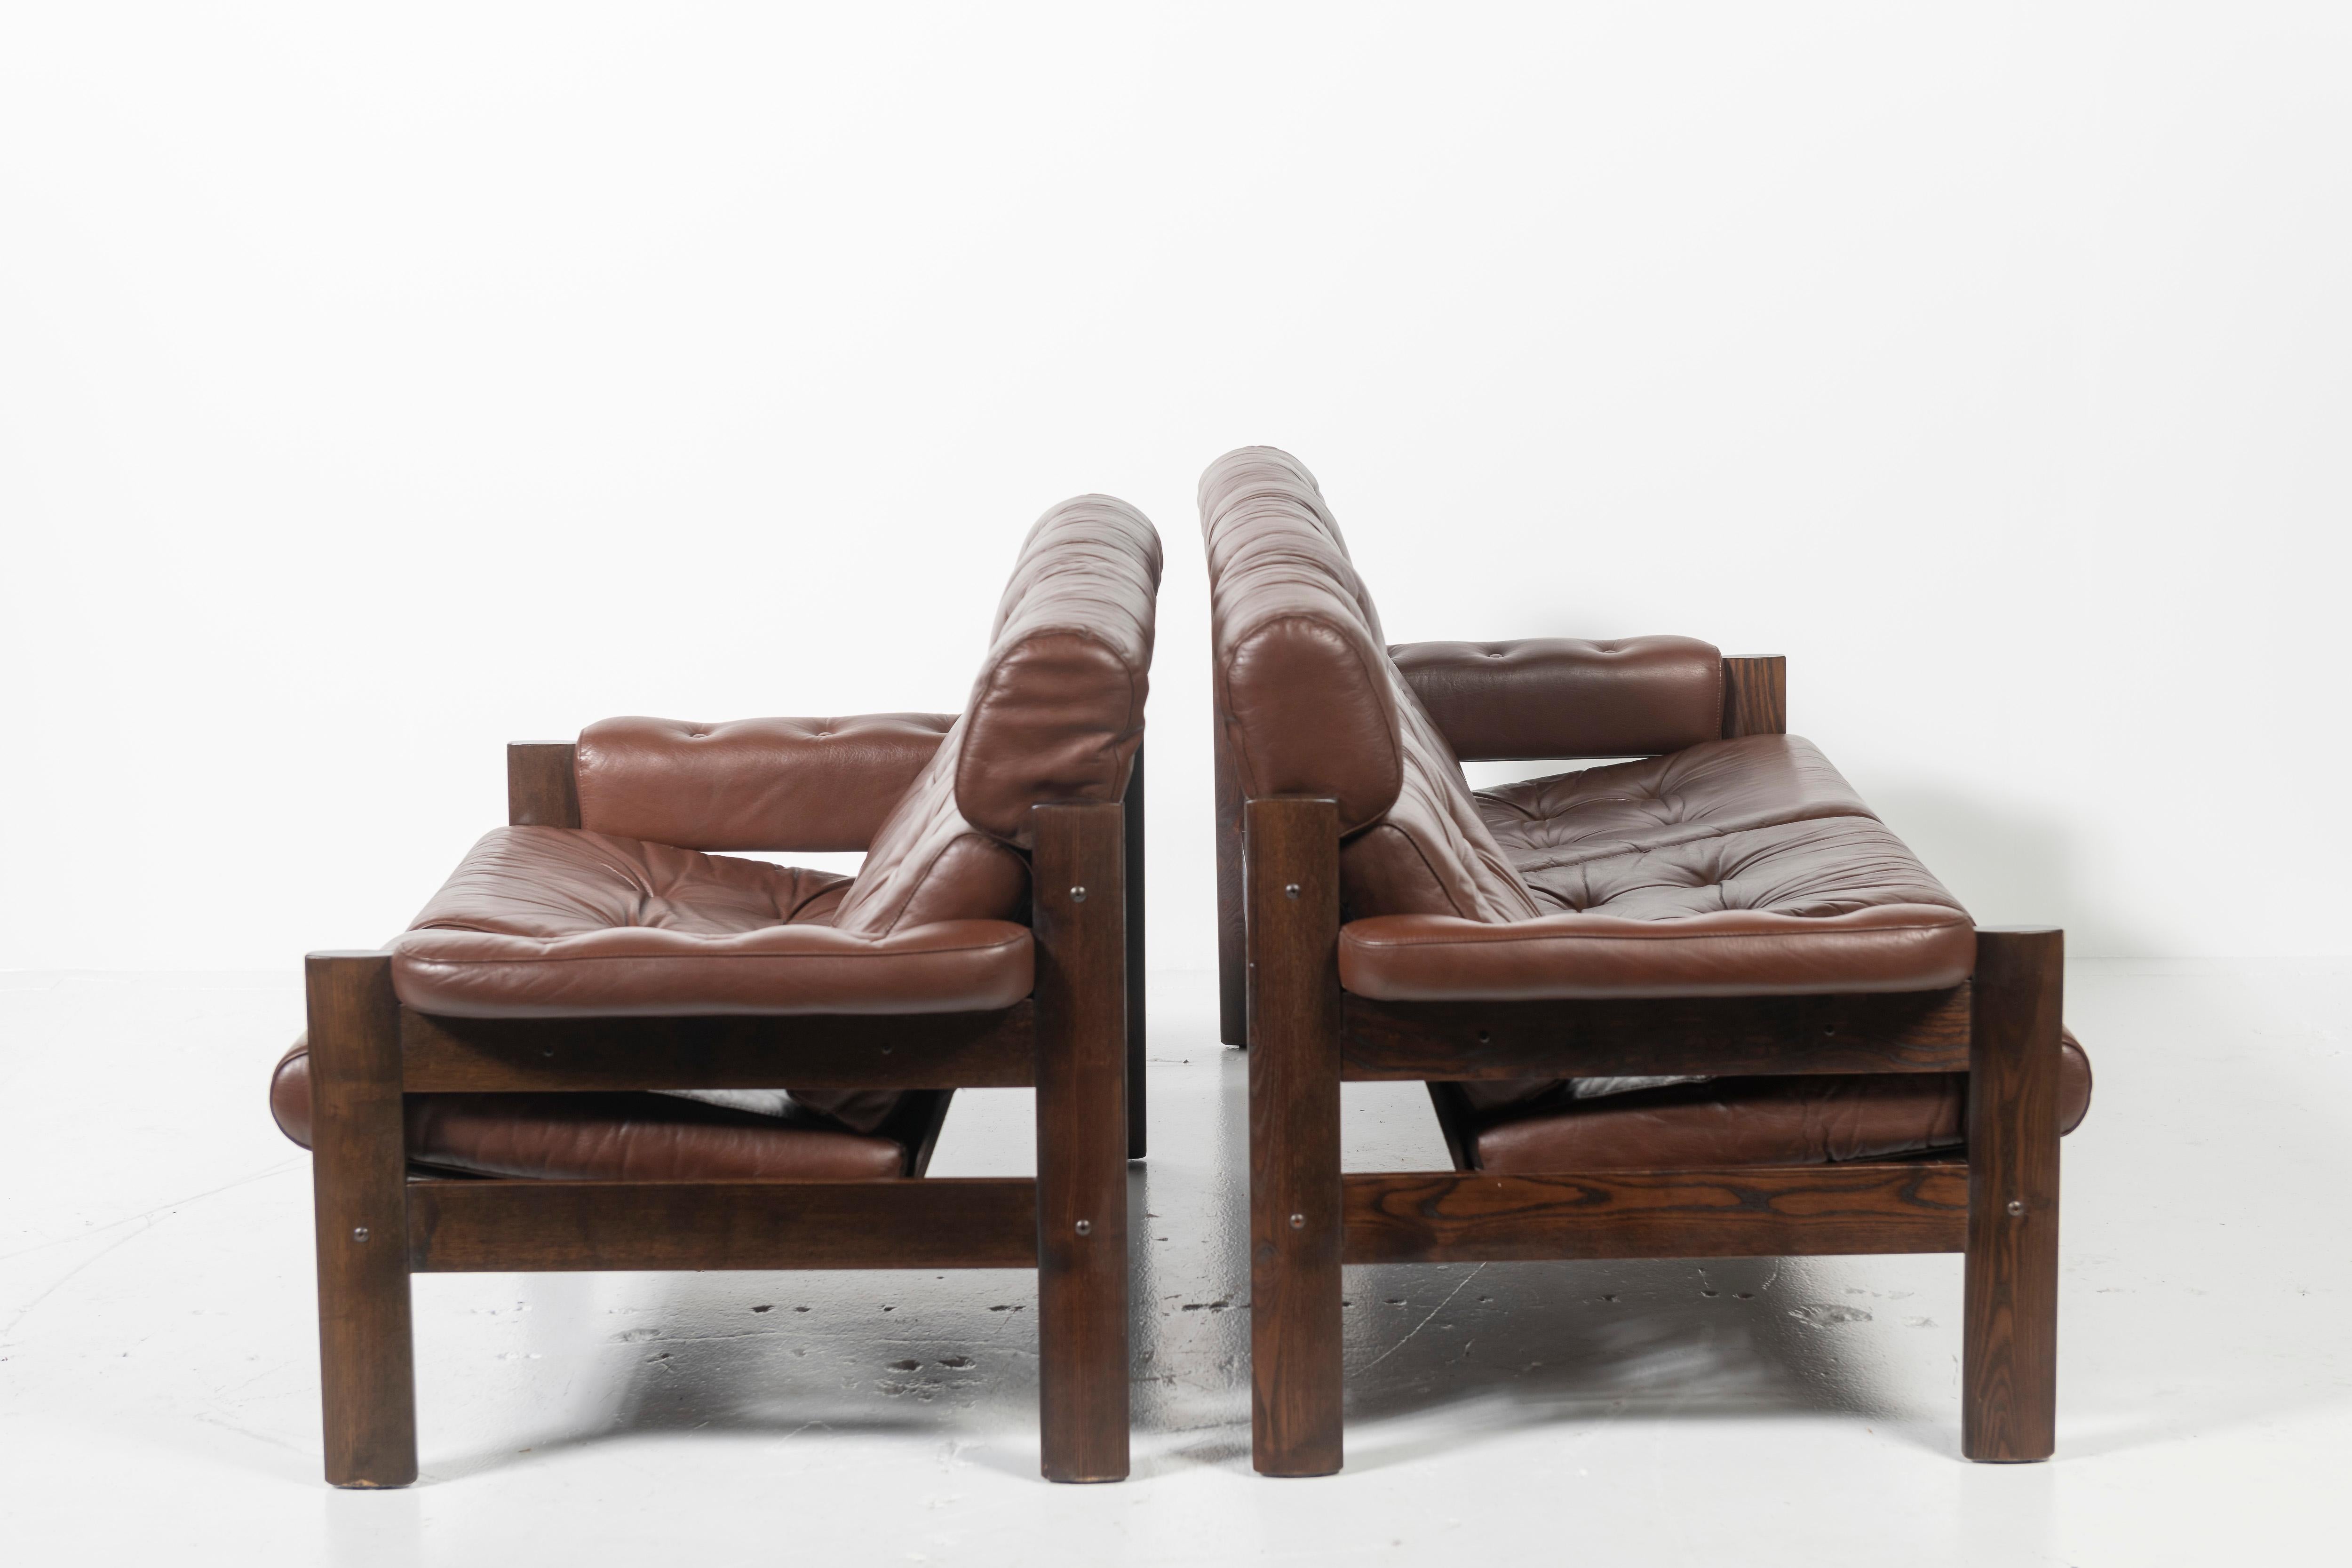 1970's Three Seat Tufted Sofa and Loveseat Set in Leather and Rosewood, Norway For Sale 1